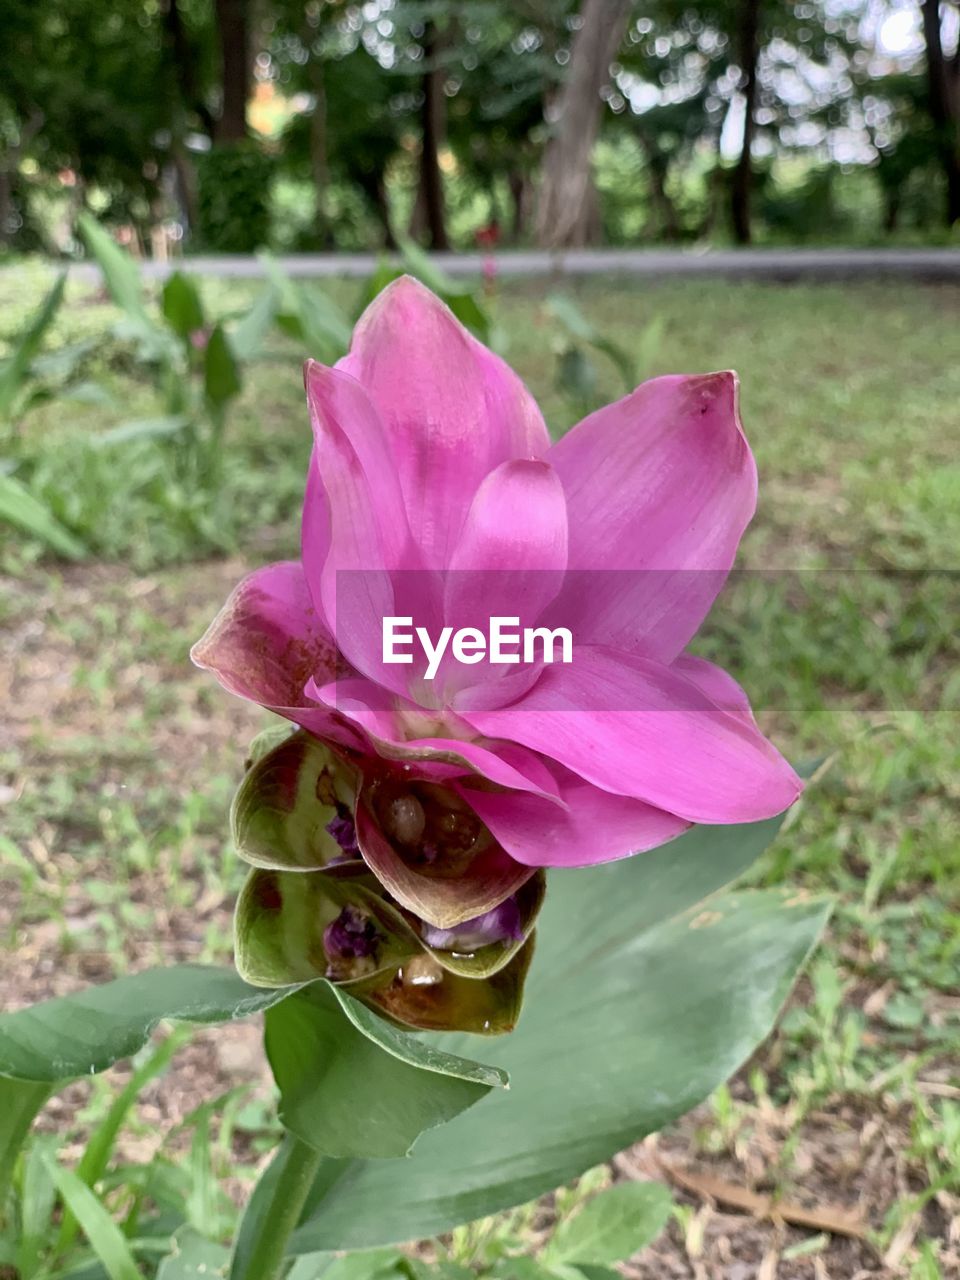 plant, flower, flowering plant, beauty in nature, pink, freshness, growth, nature, petal, close-up, fragility, focus on foreground, flower head, inflorescence, plant part, leaf, day, no people, outdoors, green, tree, springtime